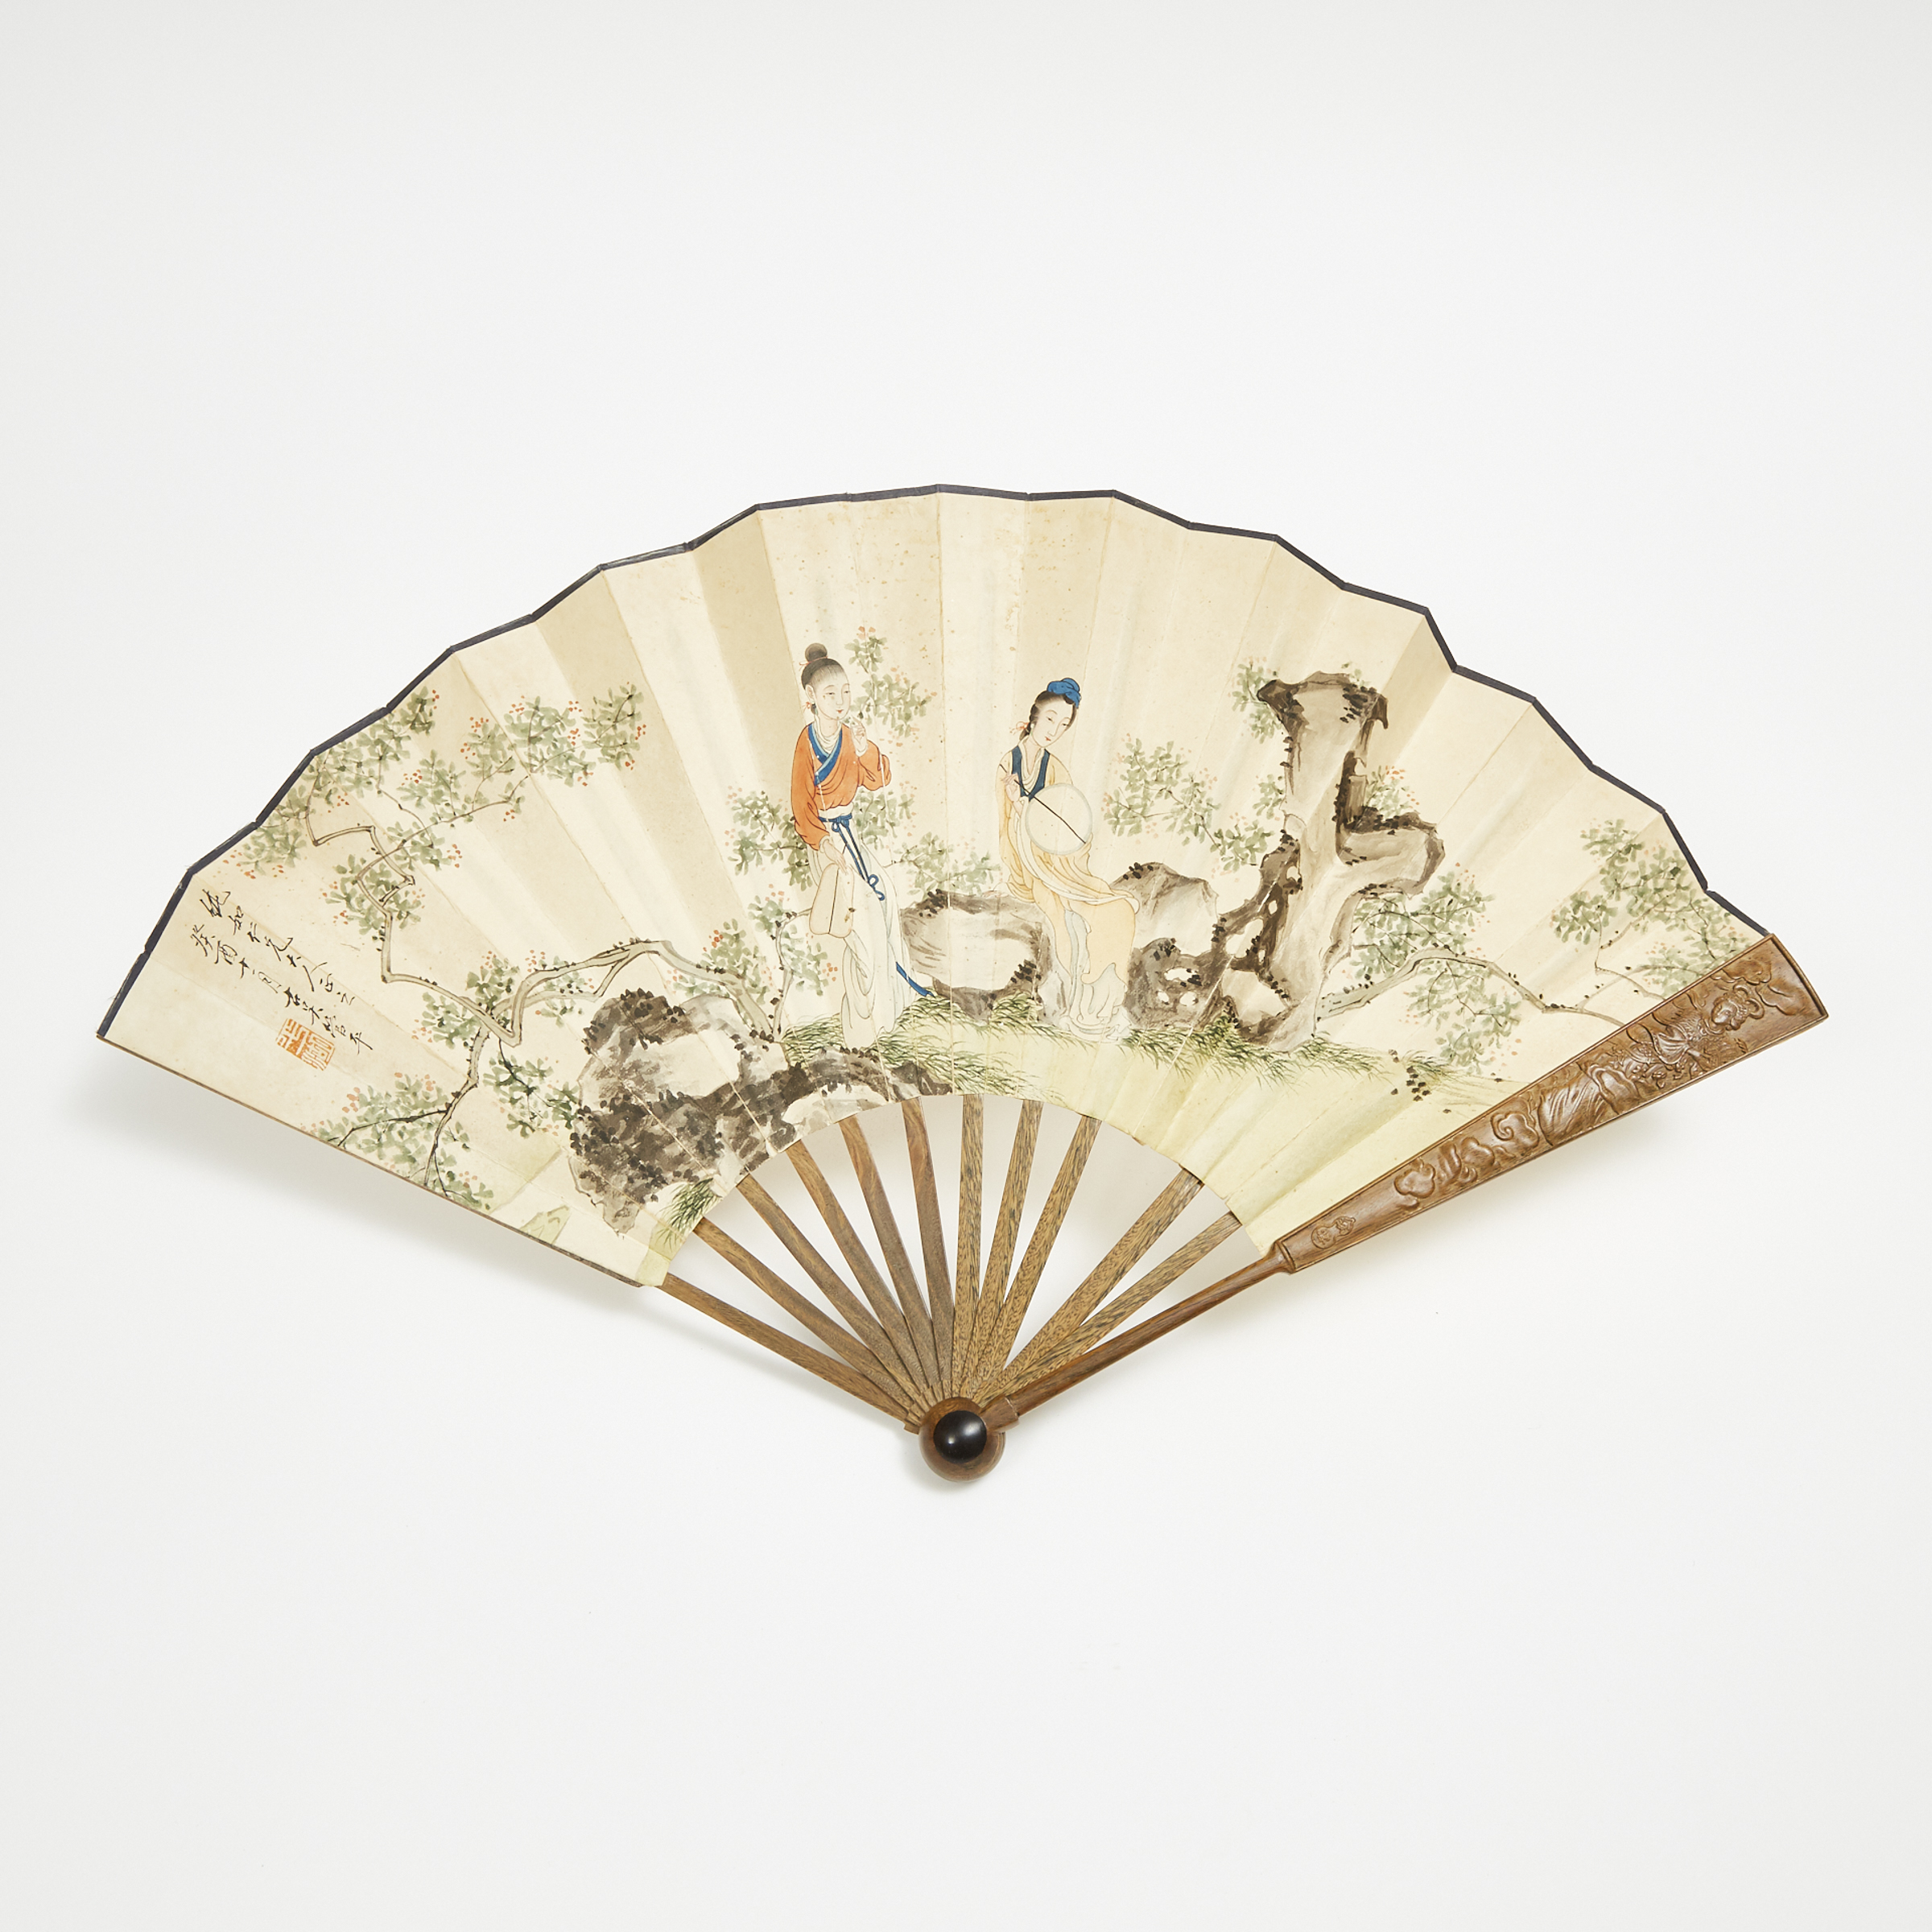 After Guan Pinghu, A Fan Painting of Ladies, Cyclically Dated to 1933